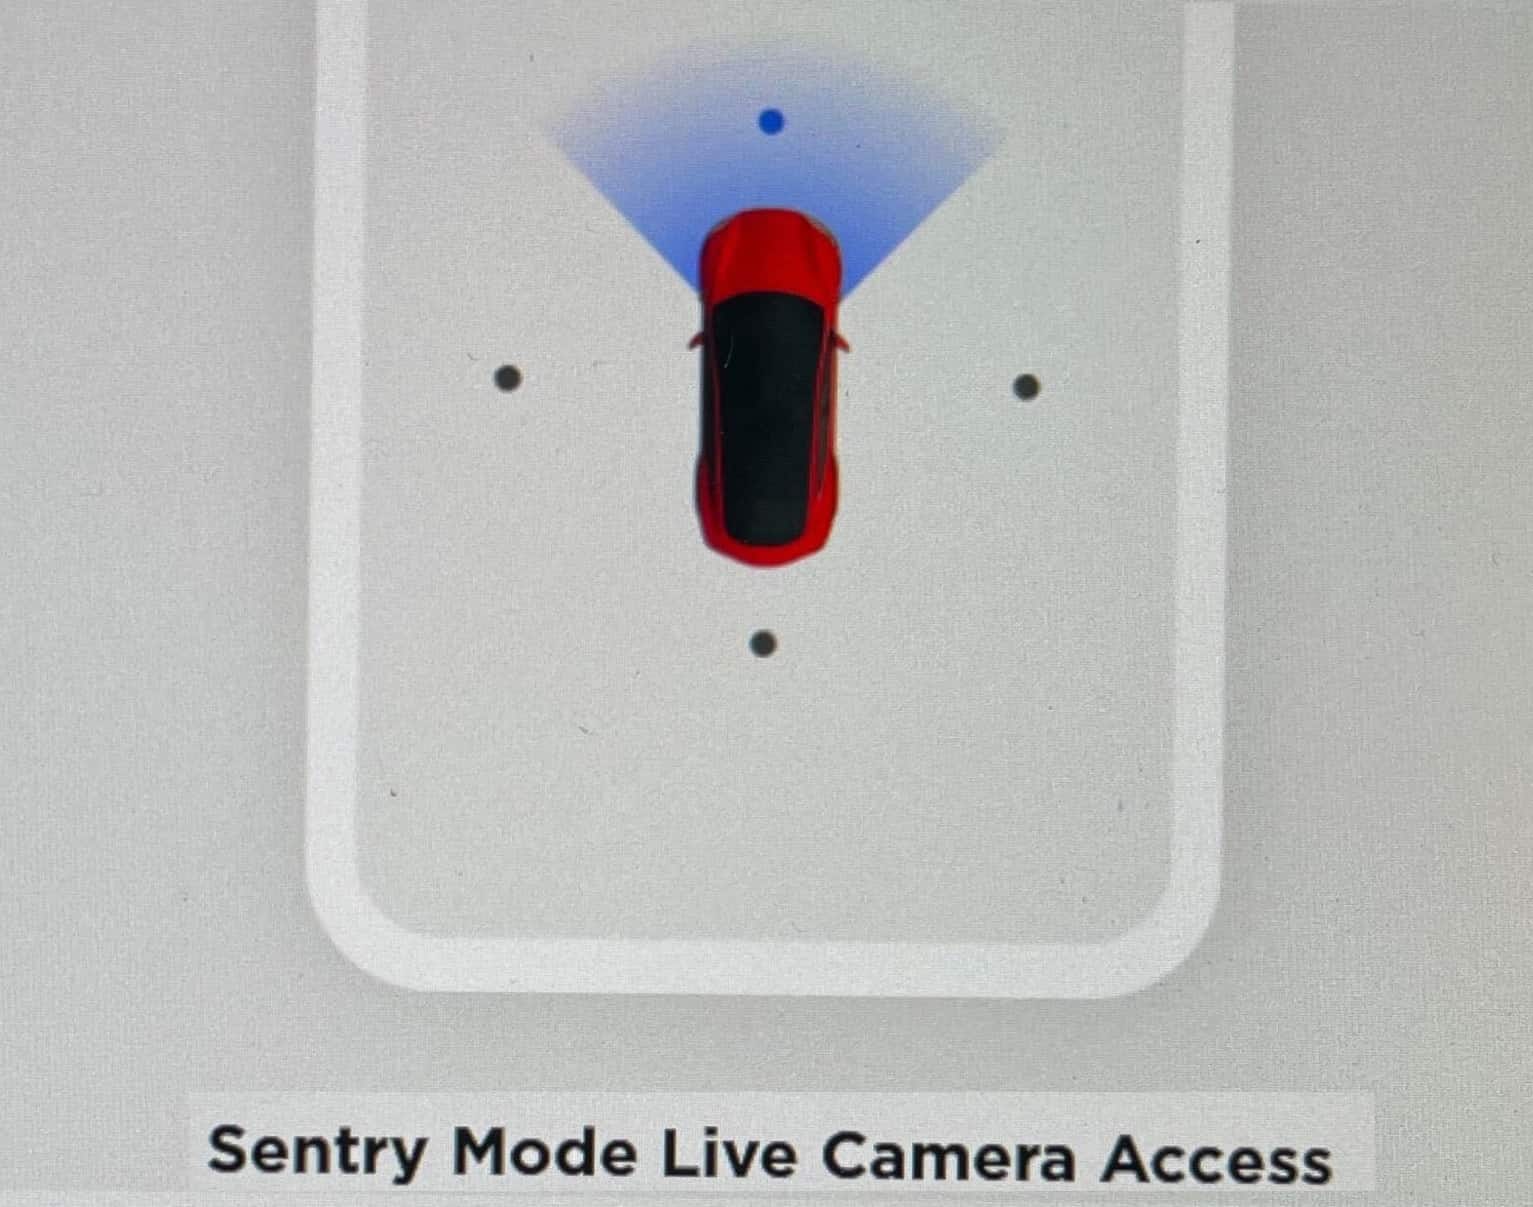 Tesla rolls out Sentry Mode Live Camera Access to some users